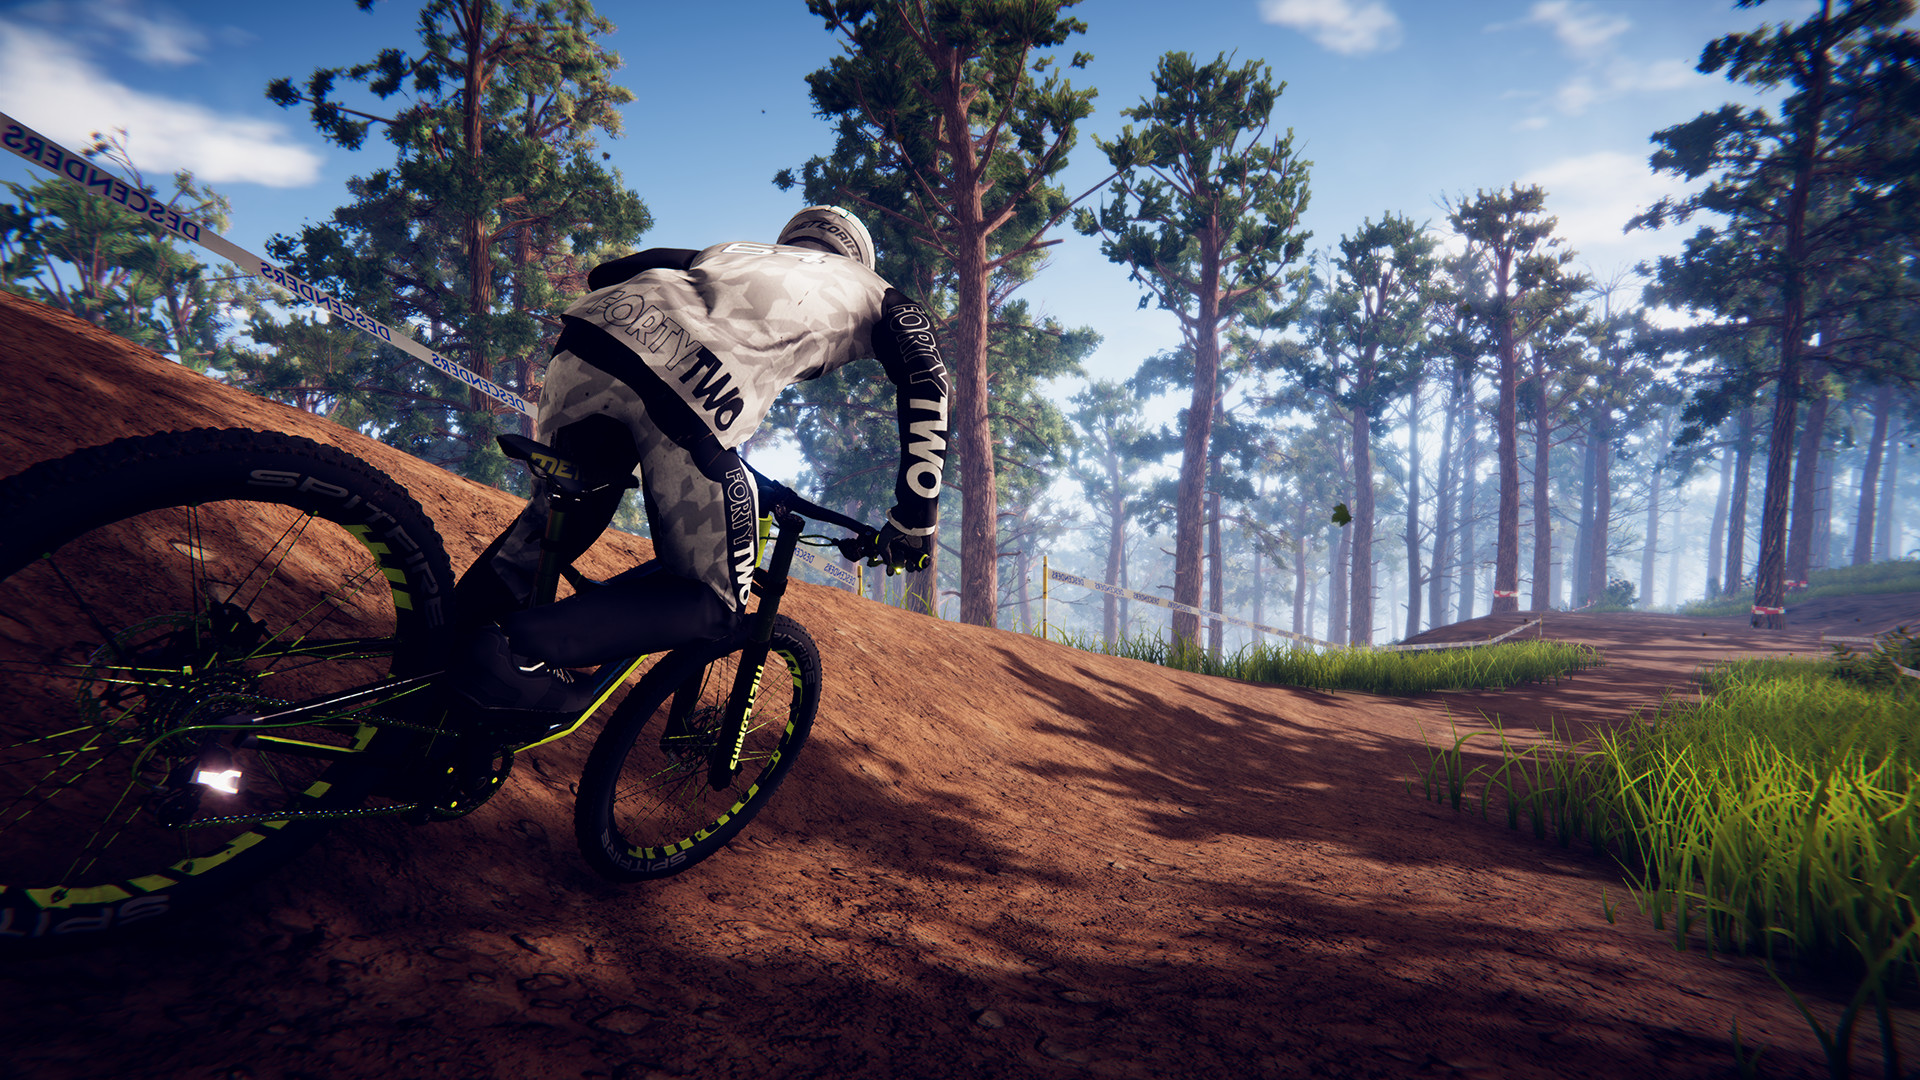 Descenders Rides Into Xbox Game Preview This Summer